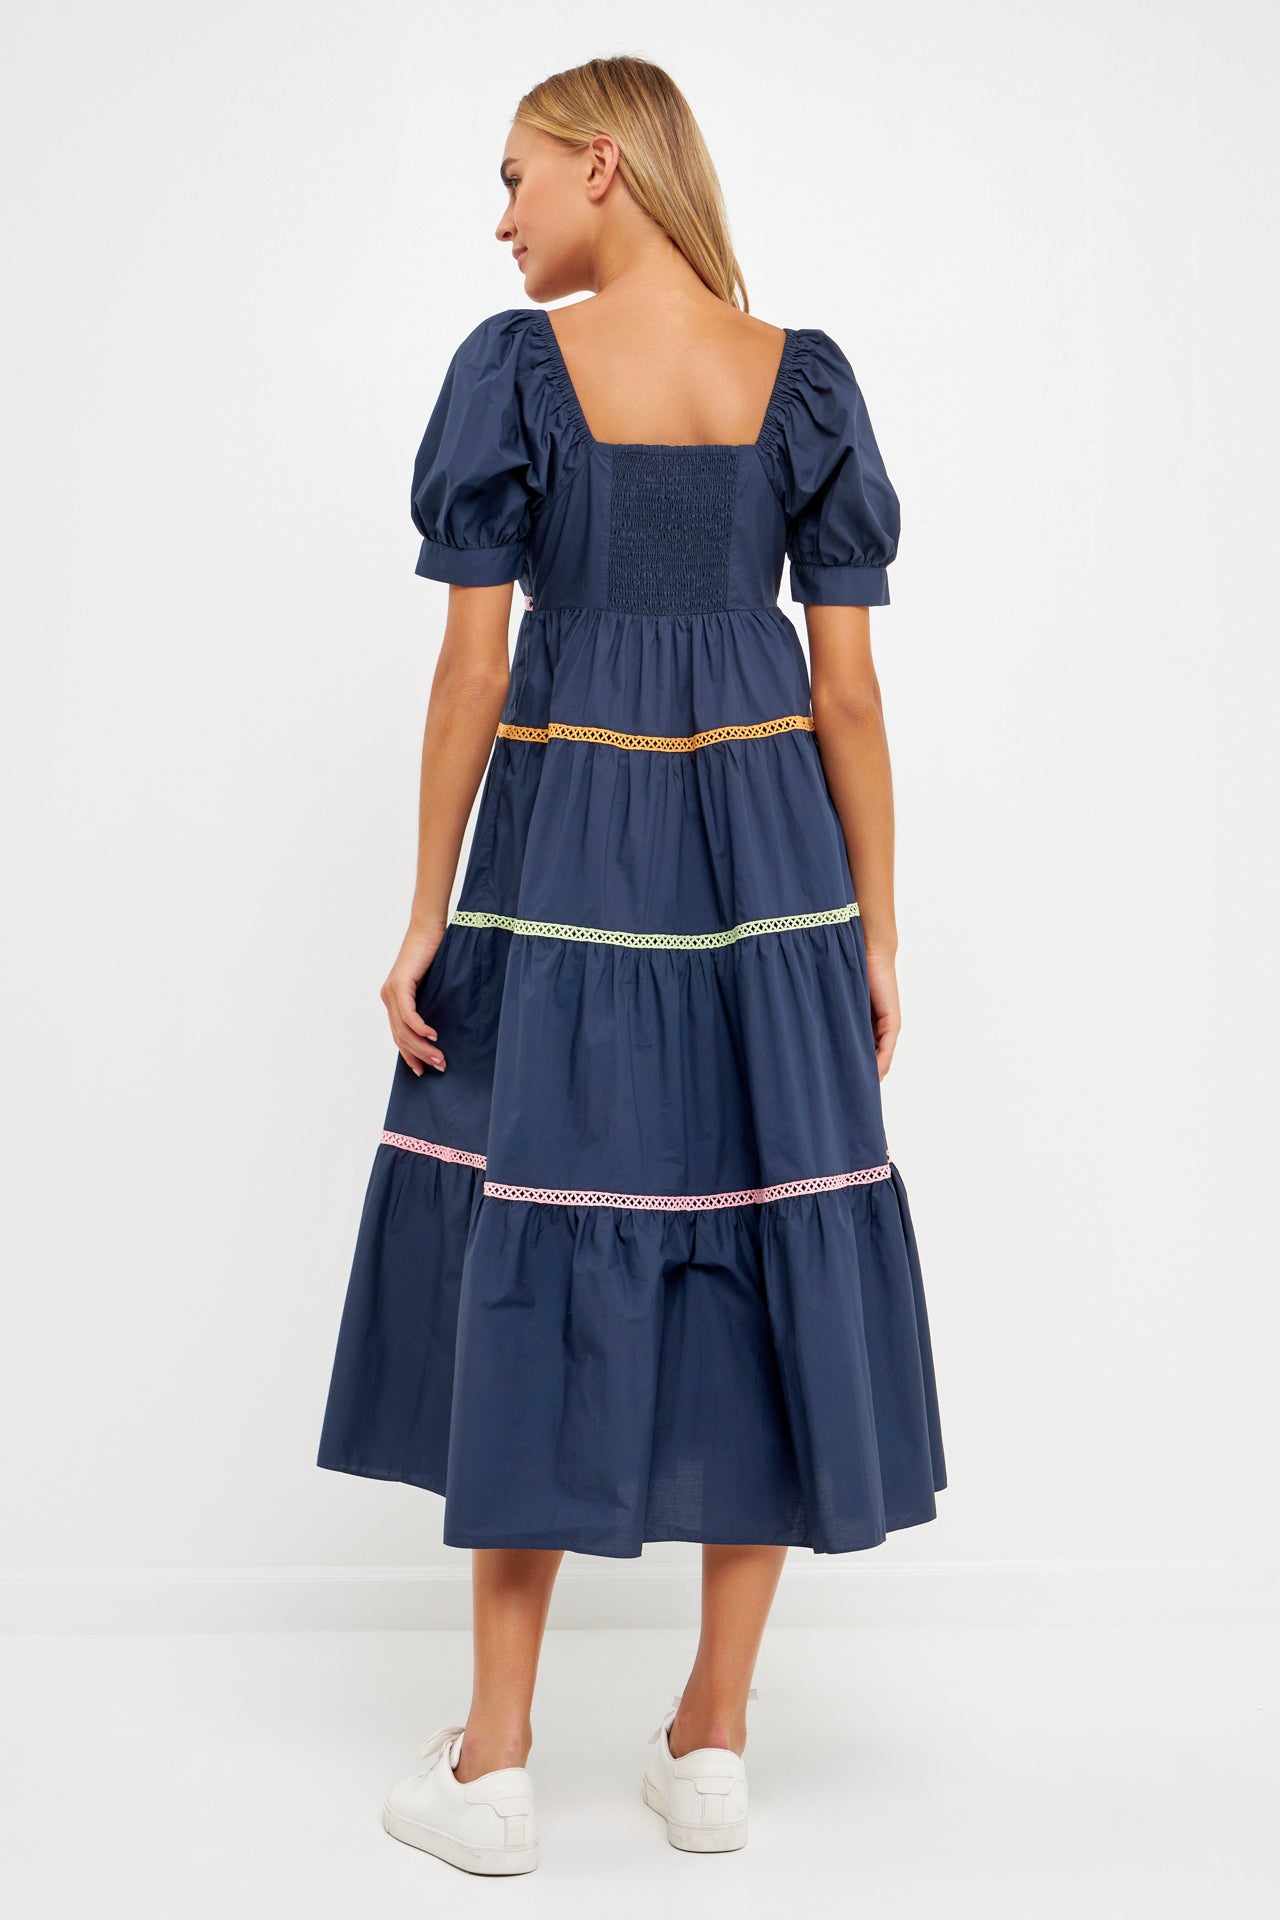 English Factory Annie Midi Dress- Navy, short puff sleeves, ribbon trimmed, sweetheart neckline, tiered